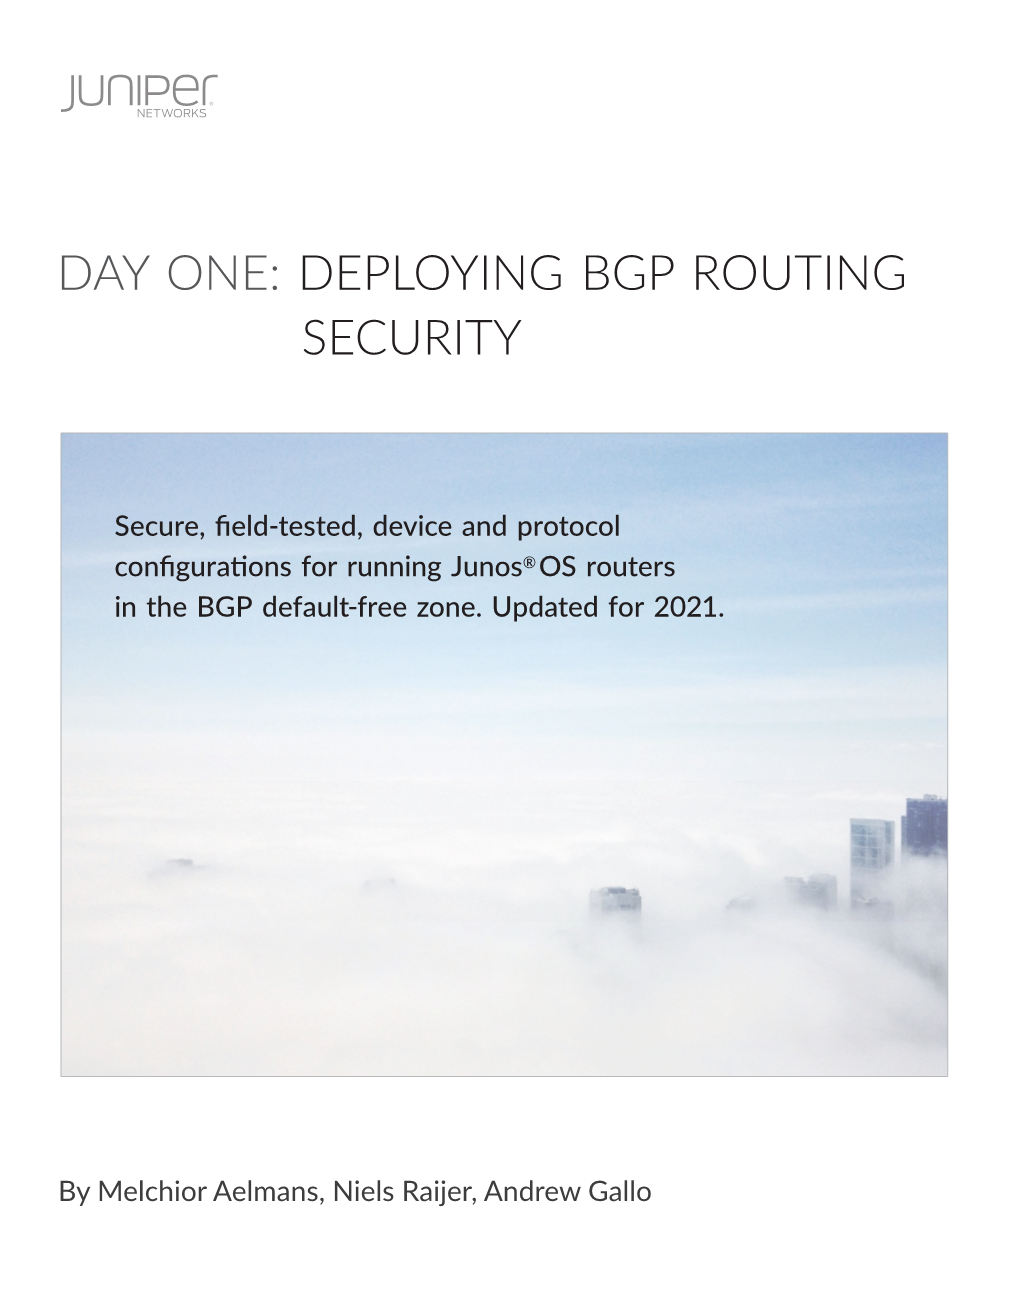 Day One: Deploying BGP Routing Security